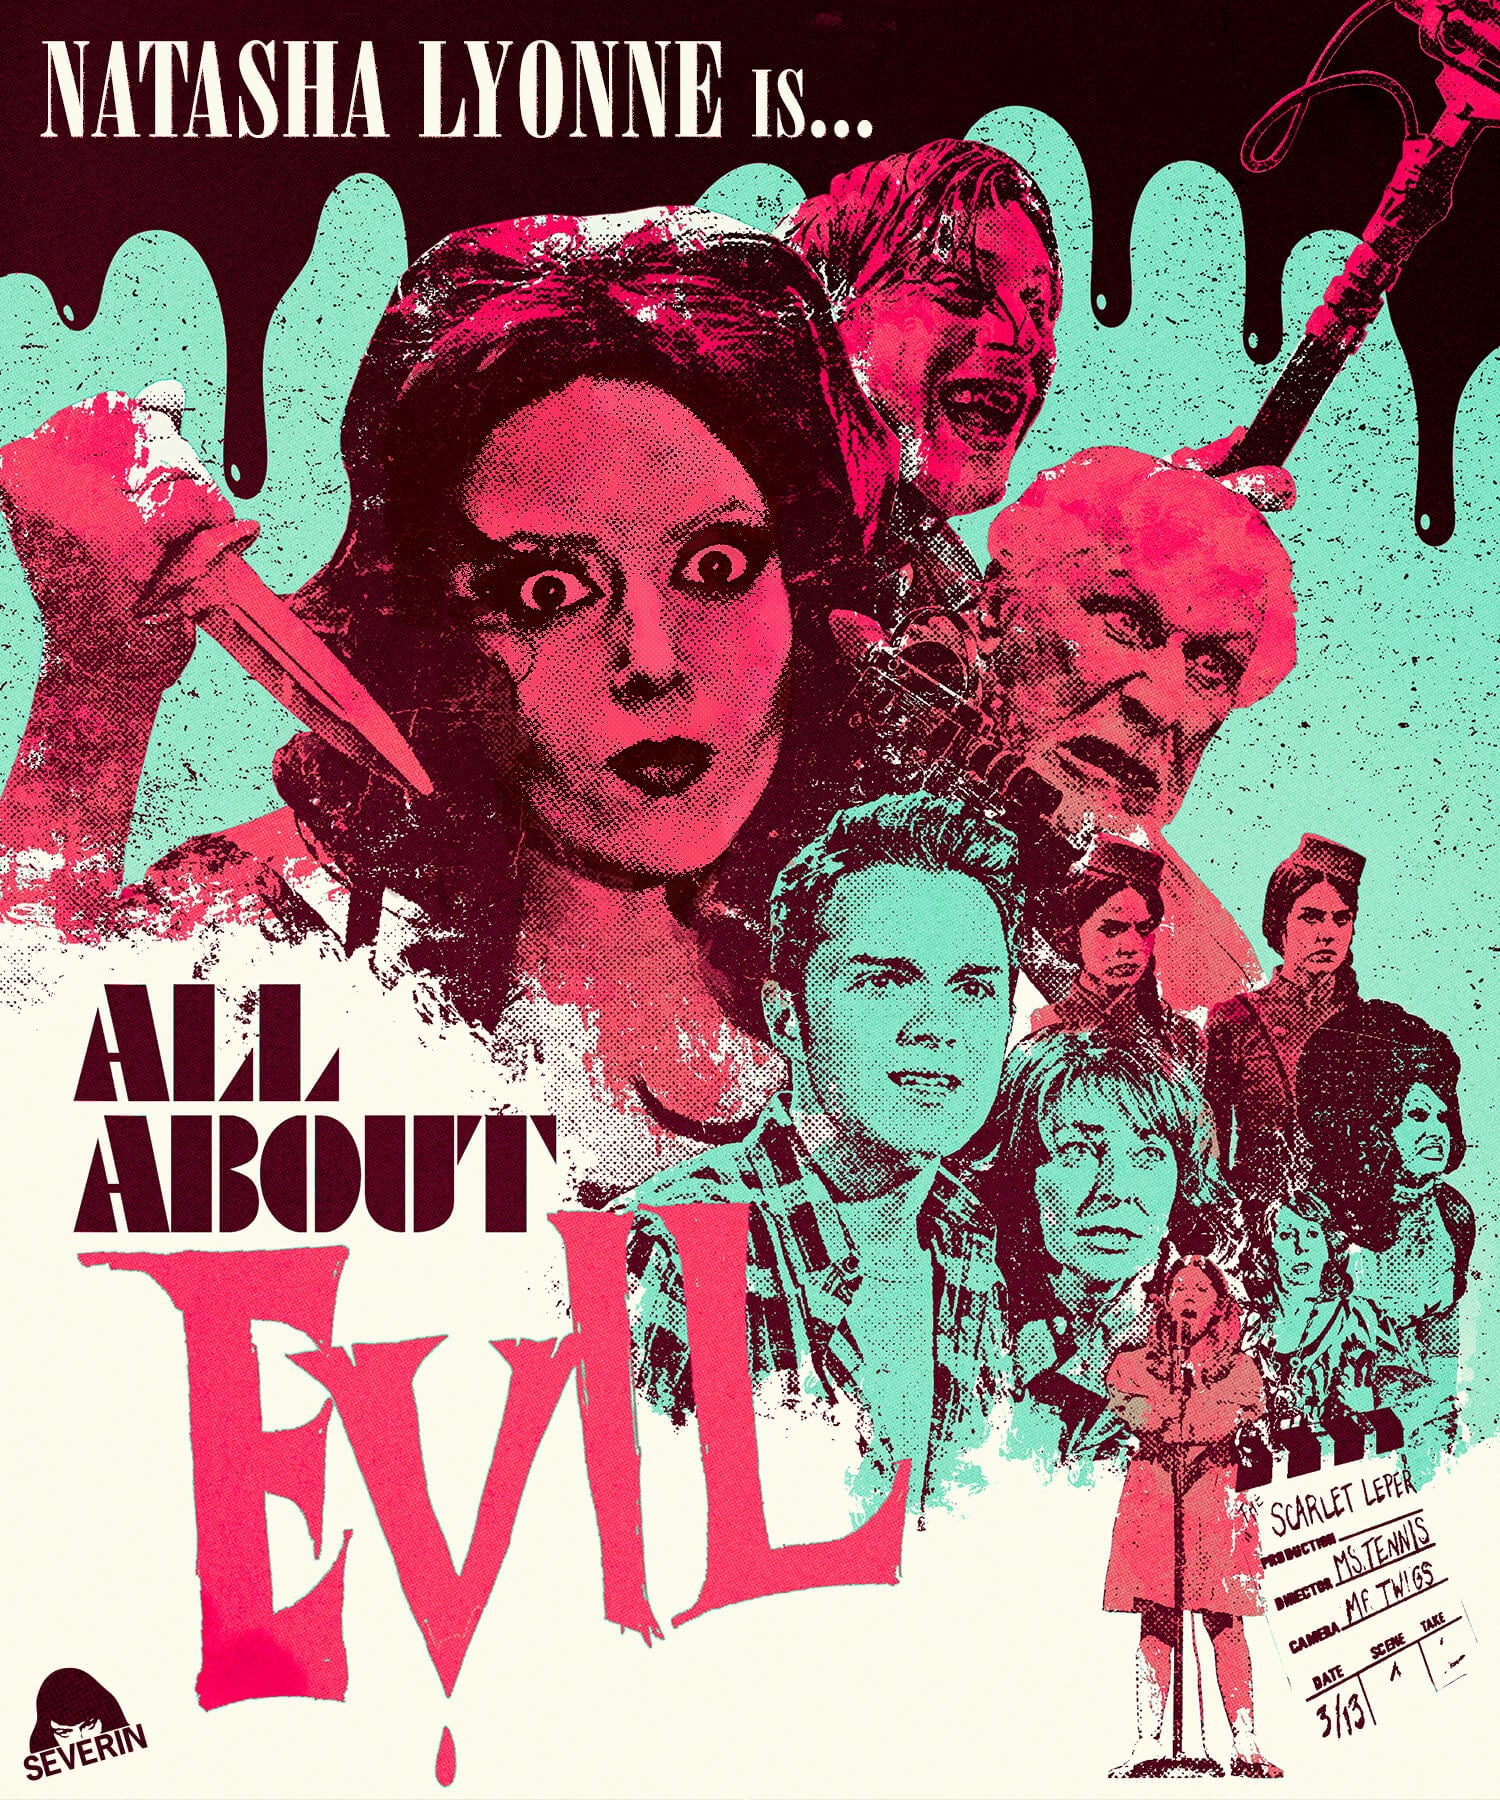 ALL ABOUT EVIL BLU-RAY/CD